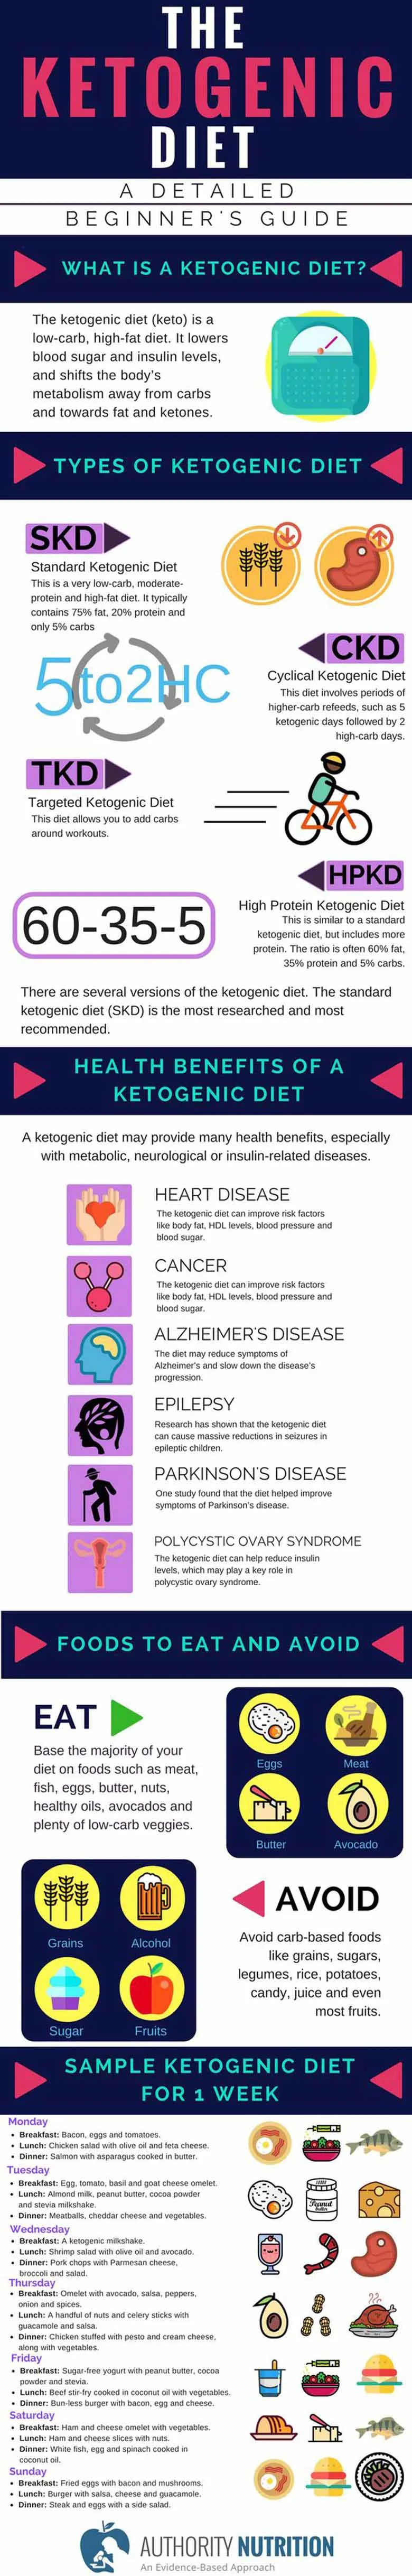 The keto diet is a low-carb, high-fat diet. It lowers blood sugar and insulin levels, and shifts the body’s metabolism away from carbs and towards fat and ketones. #ketodietforbeginners